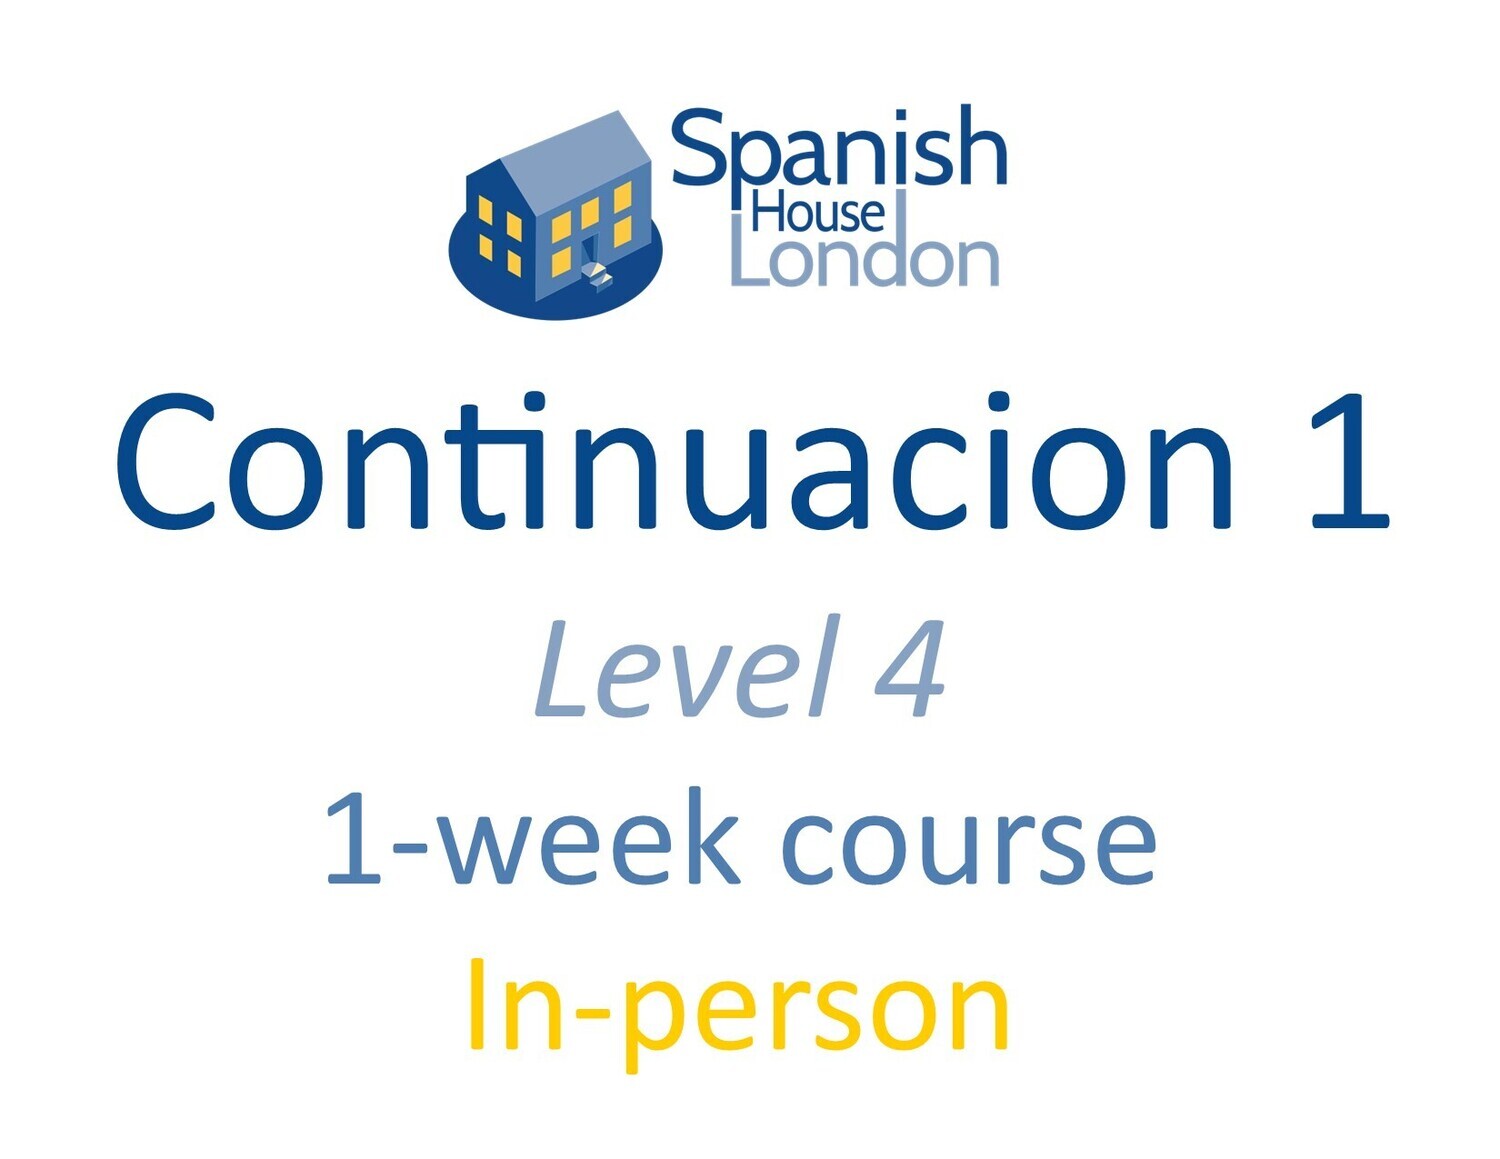 One-Week Intensive Continuacion 1 Course starting on 16th October at 10.30am in Clapham North